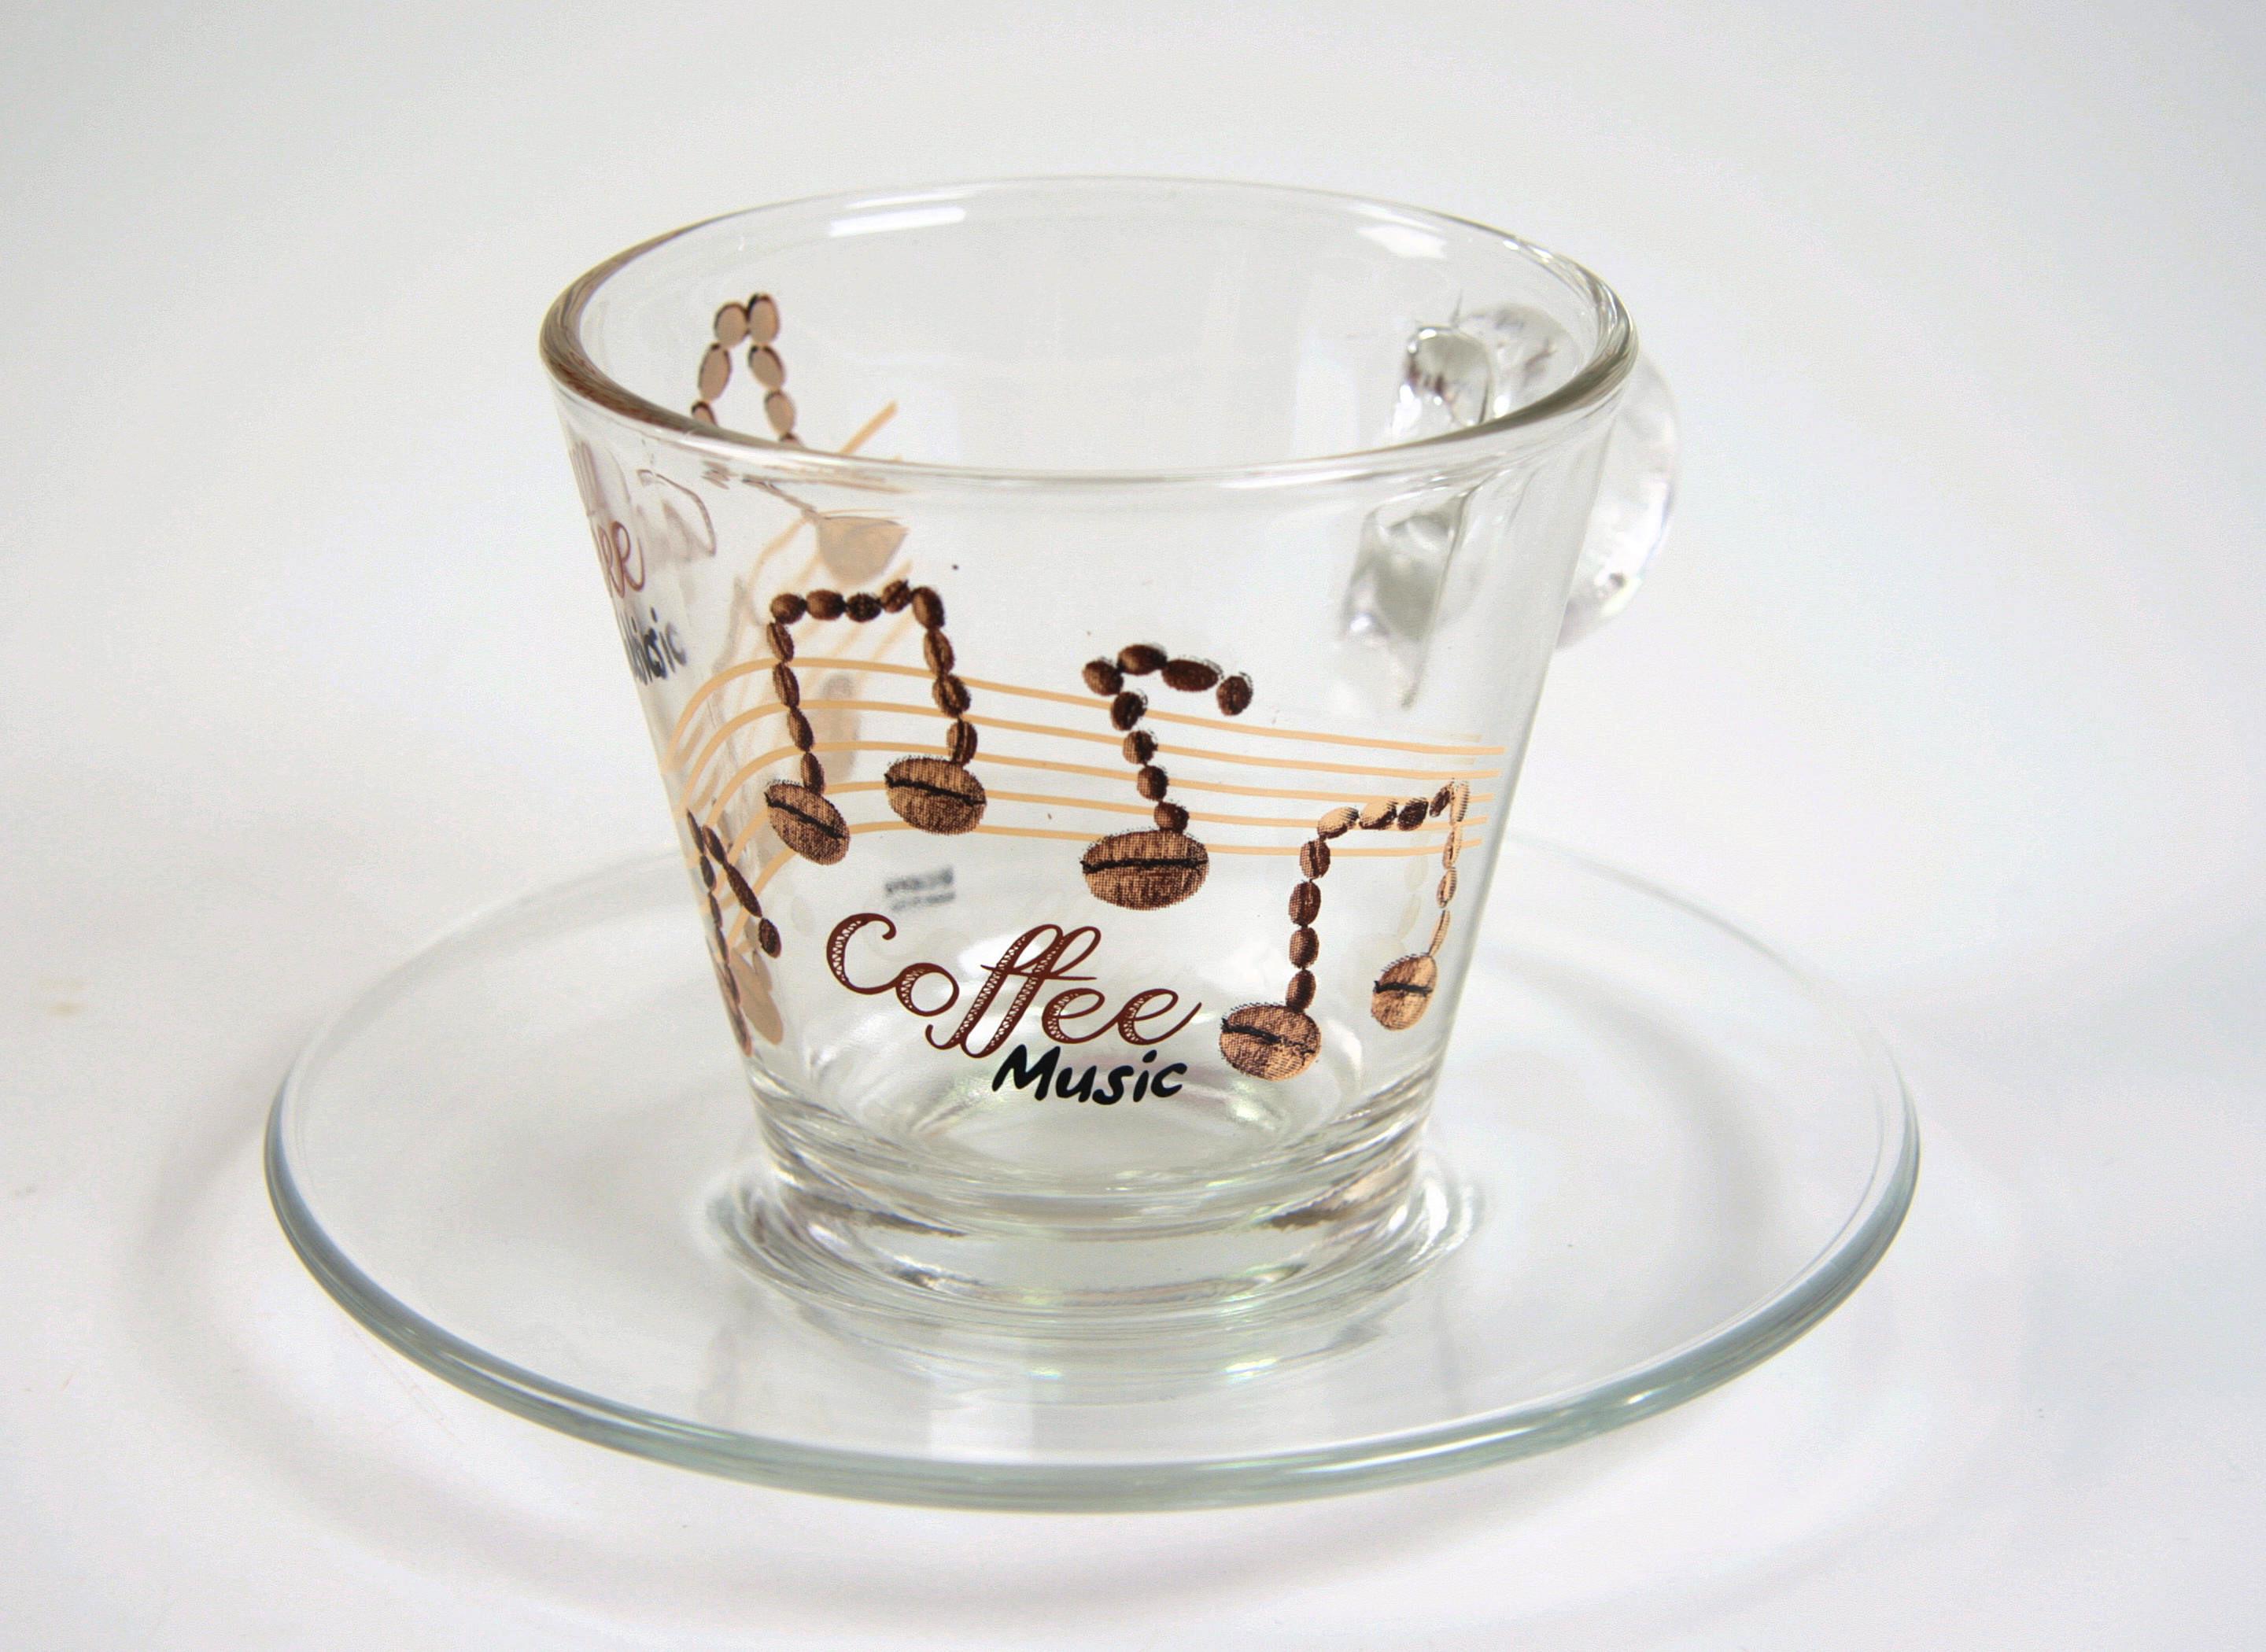 Cappuccinotasse "Coffee Music"